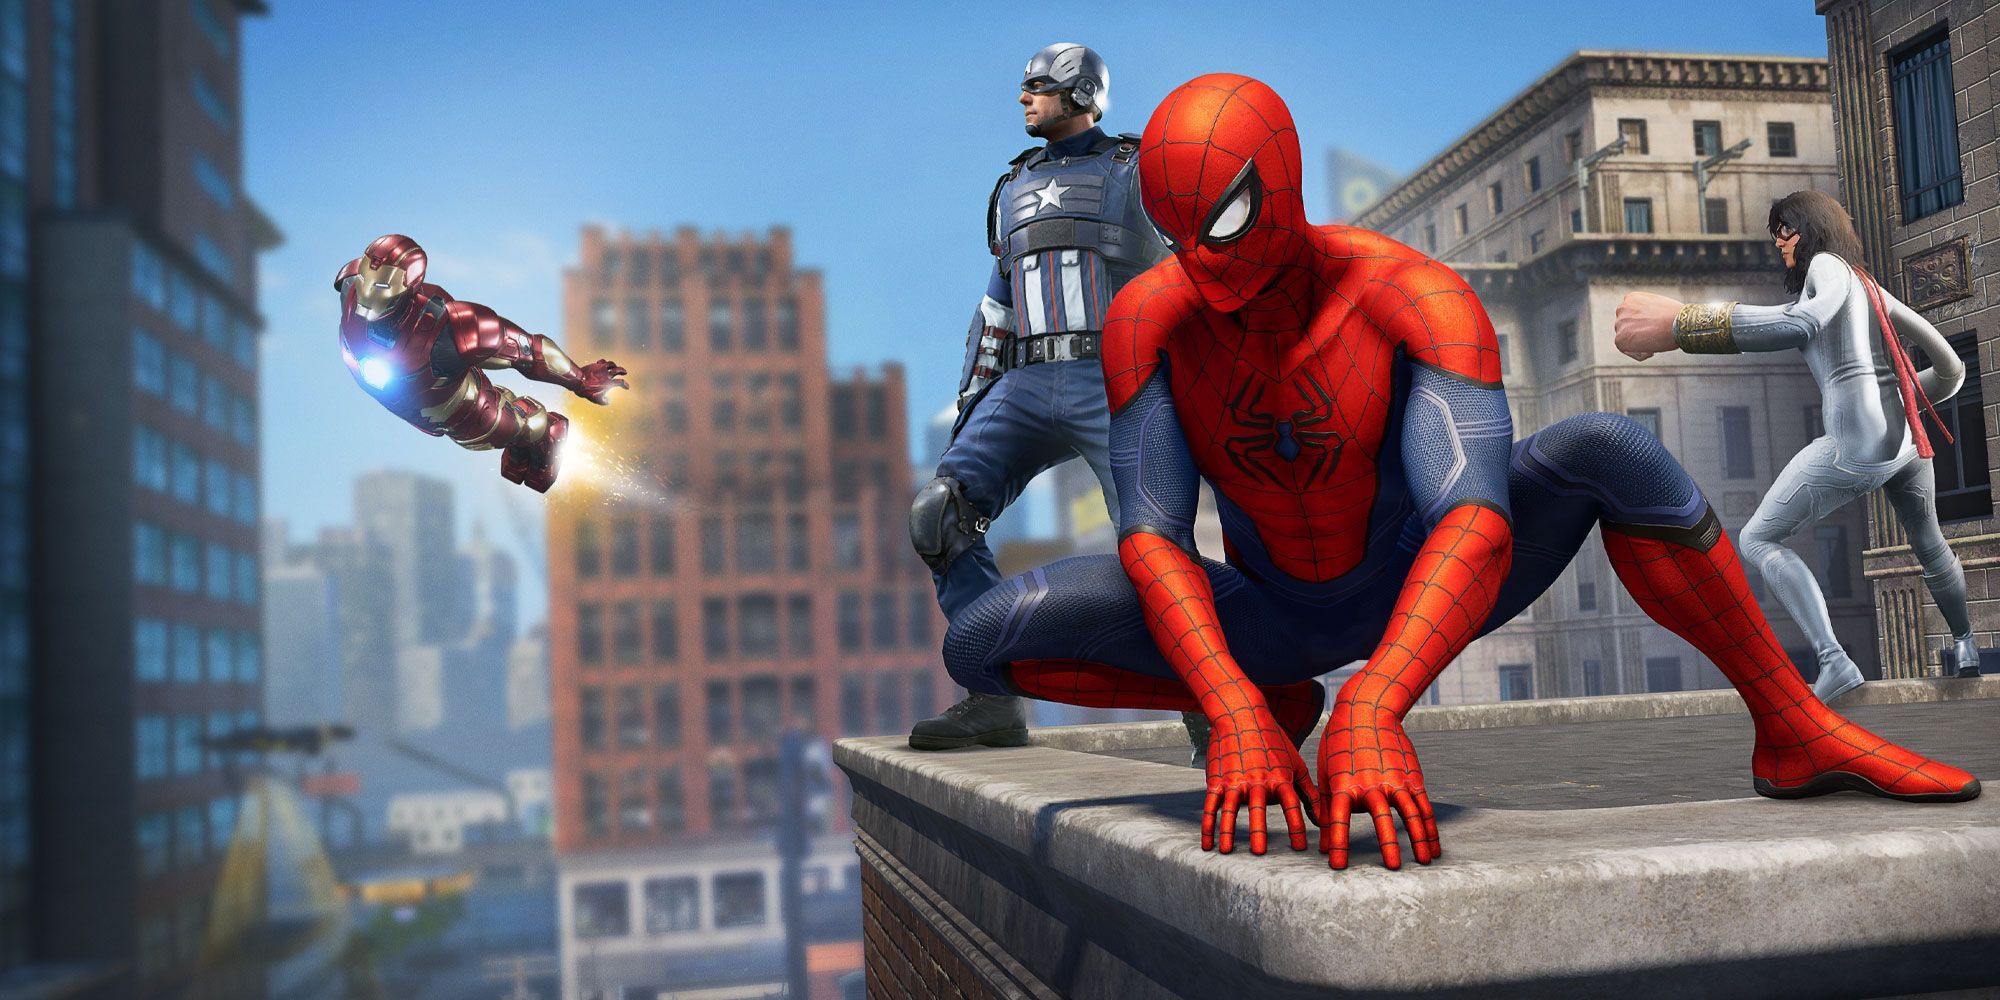 marvels-avengers-spider-man-perching-on-ledge-feature-header